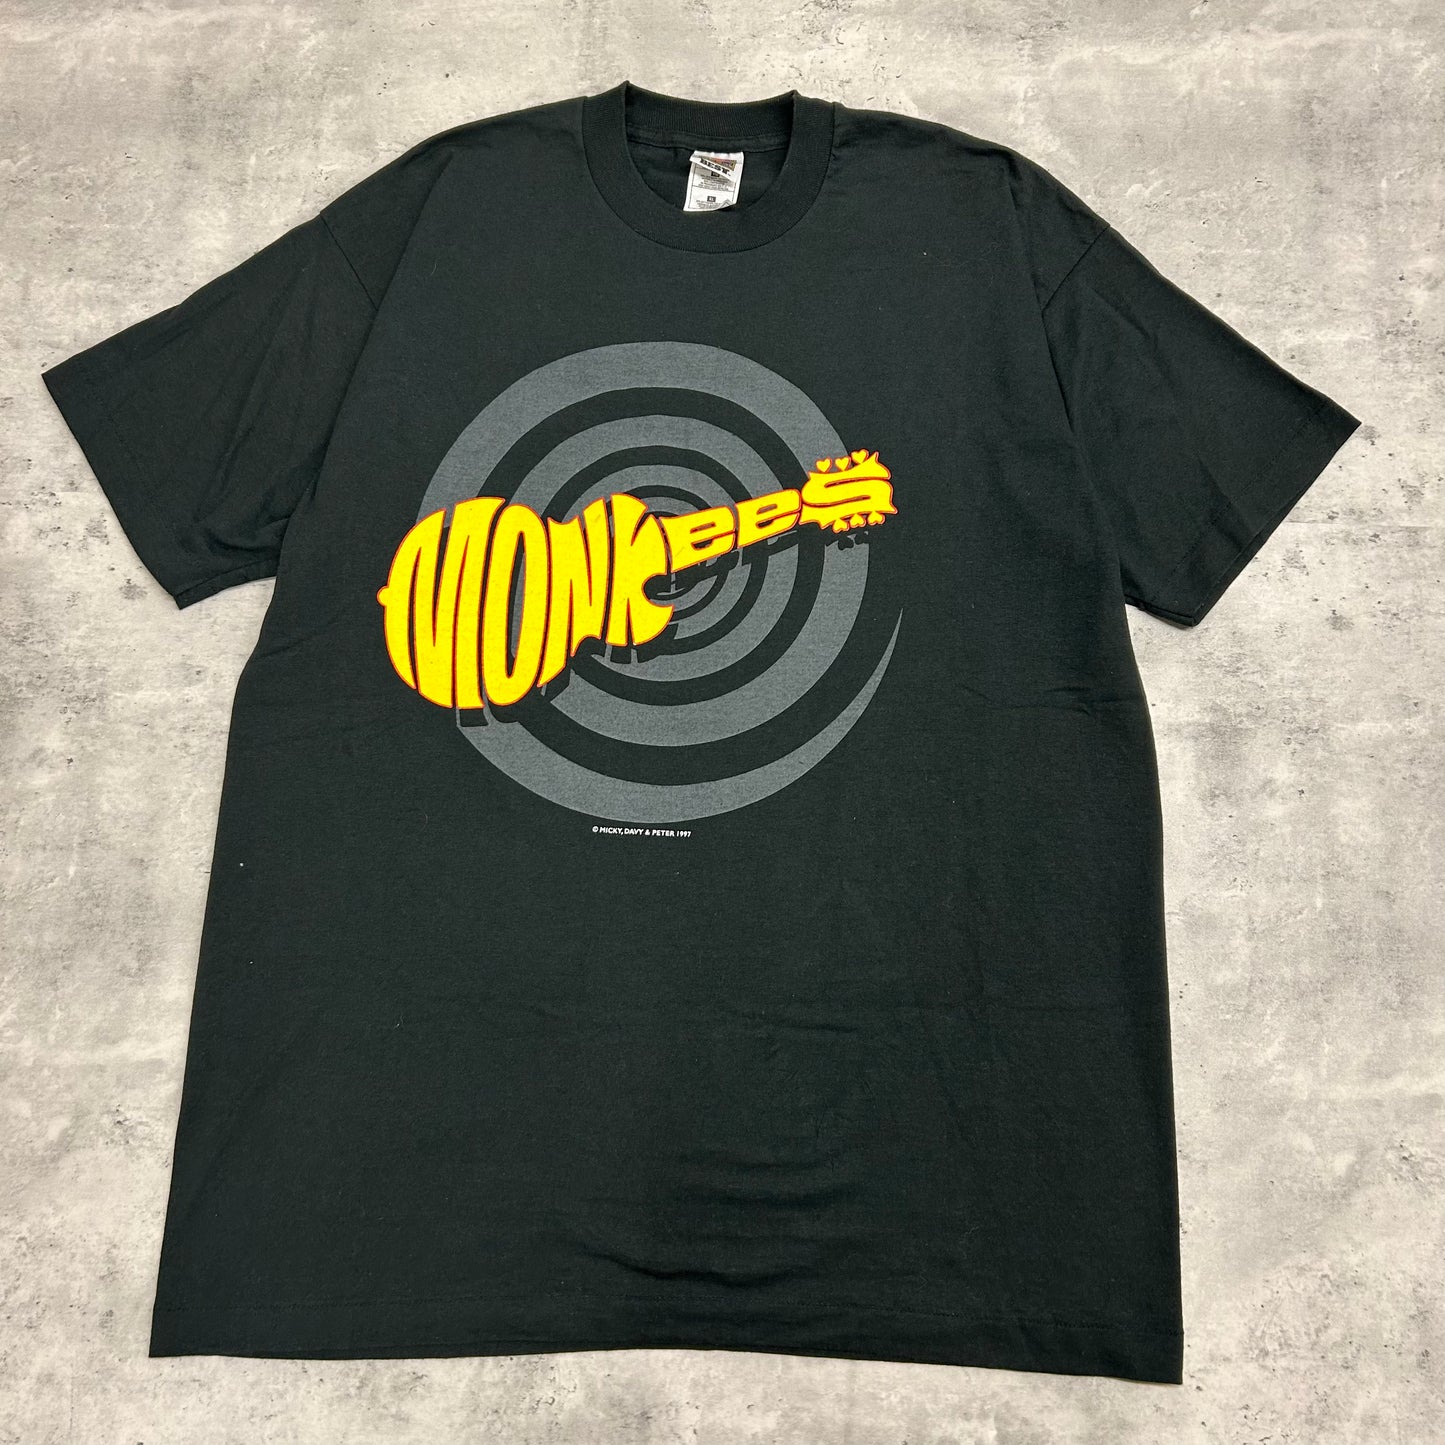 1997 The Monkees Band T-Shirt size XL